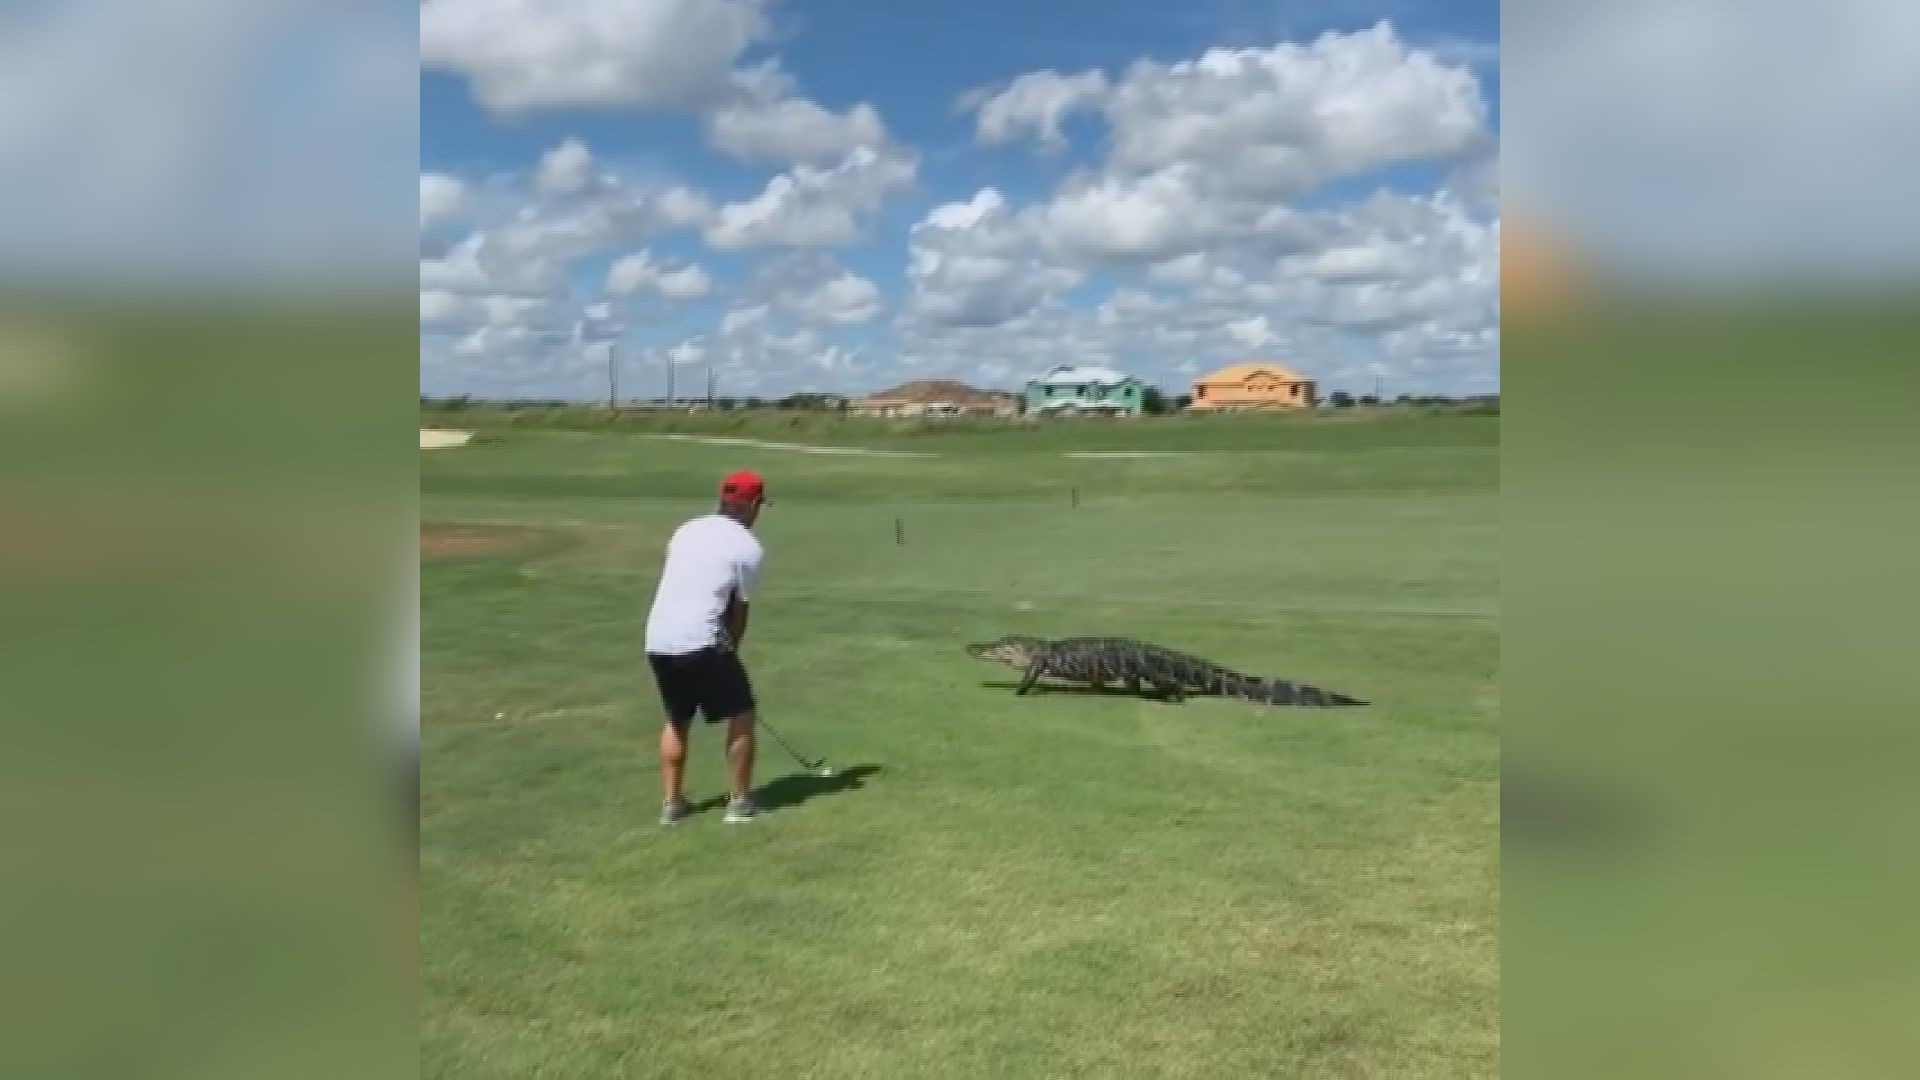 There's an extra hazard to worry about on this Florida golf course.

If you guessed "gator," you'd be absolutely correct.

Steel Lafferty was playing a round of golf Wednesday when the toothy-looking reptile walked on by.